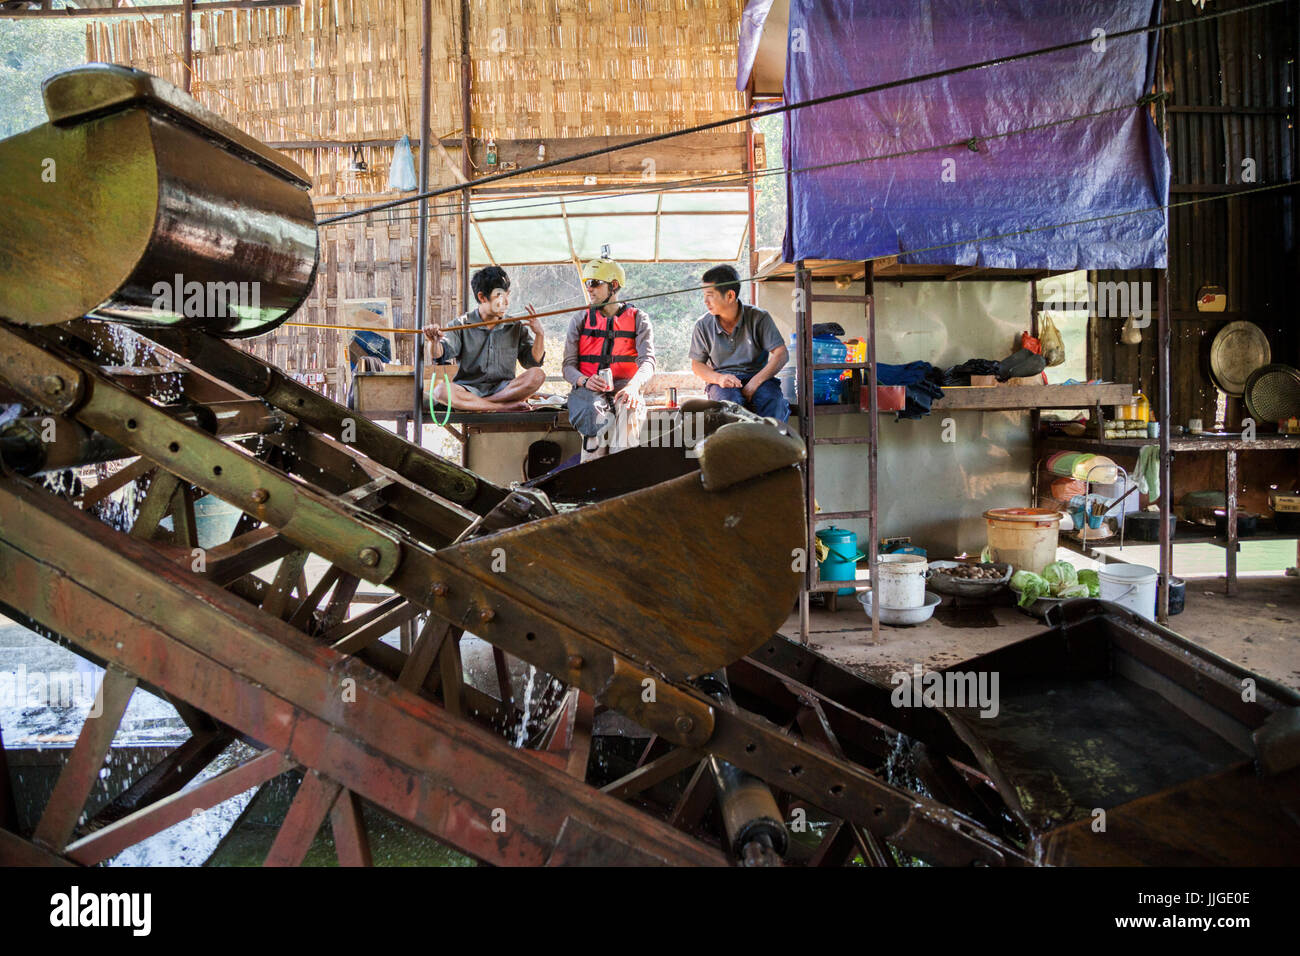 Robert Hahn (center) chats with Vietnamese workers, while drinking a Vietnamese beer, on a mechanical gold dredge floating on the Nam Ou River, Laos. Six men live on the vessel for months, rotating throughout the day and working in pairs to keep the machine in constant operation. Stock Photo